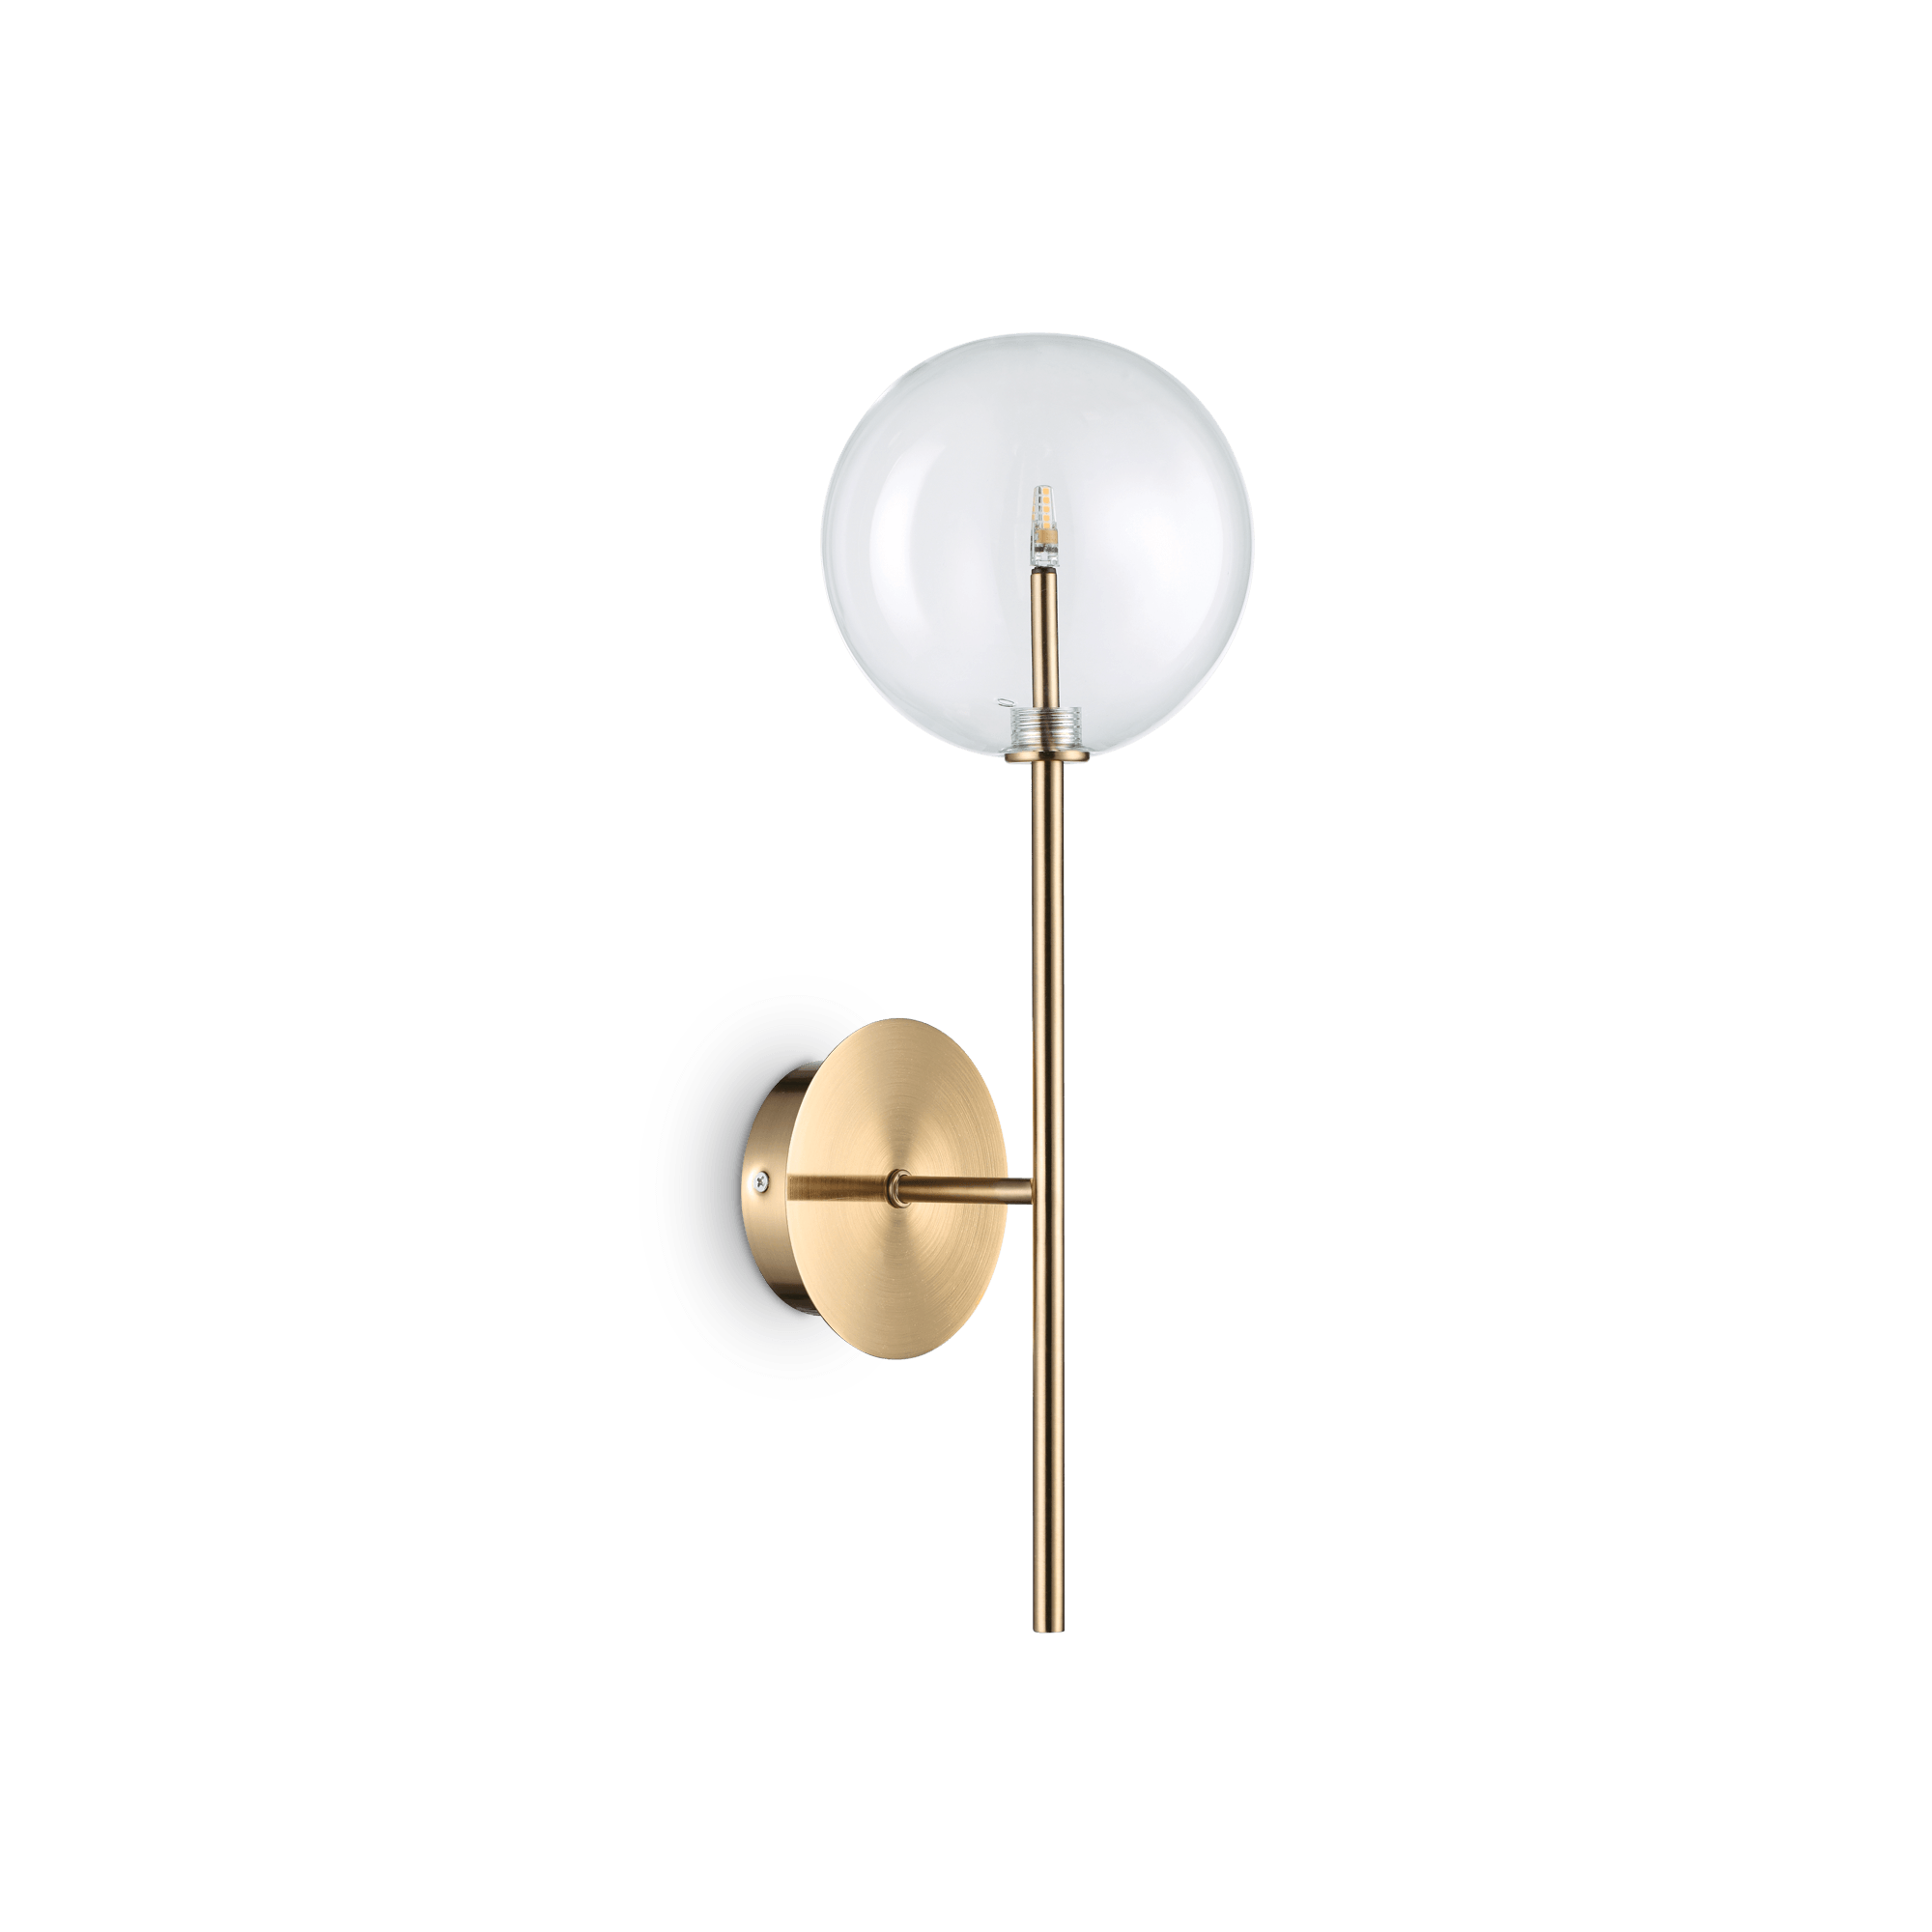 Equinoxe Wall Lamp - Chrome/Antique Brass Finish